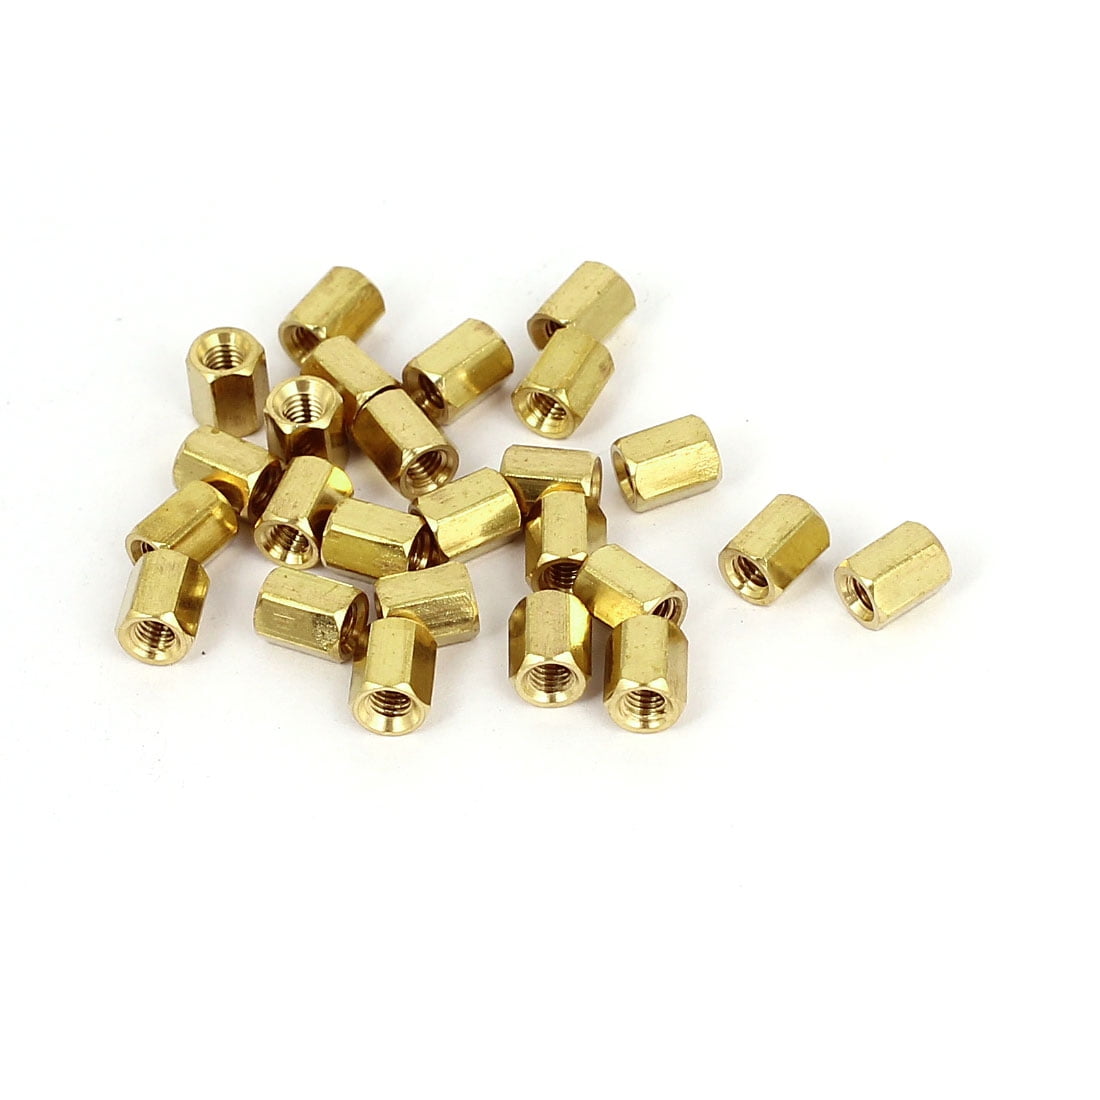 25PCS Brass Hex Stand-Off Pillars Male to Female 6mm 6mm M3 New